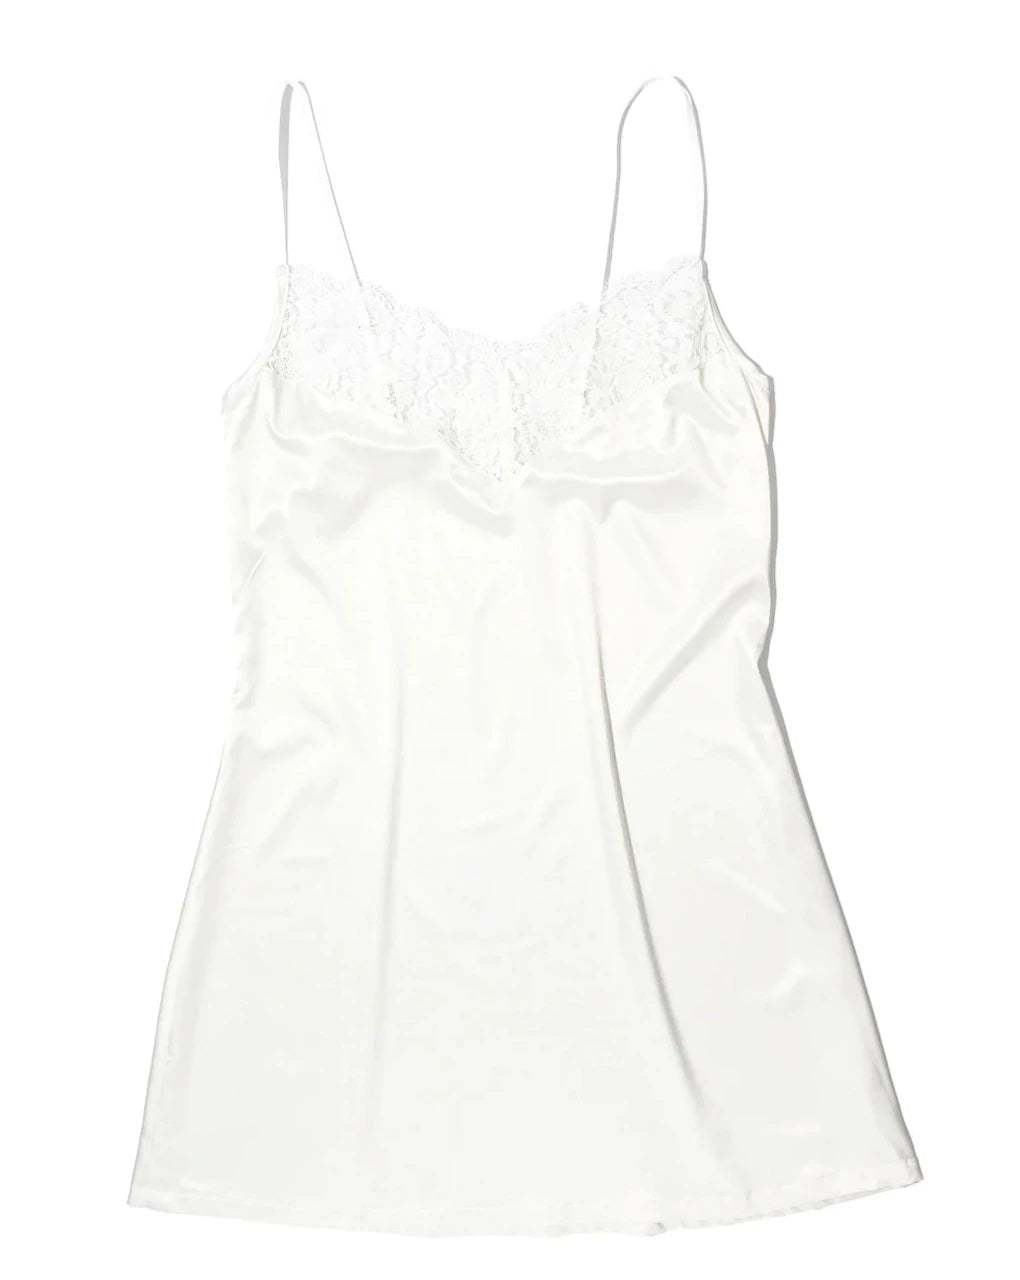 Happily Ever After Chemise - Beestung Lingerie